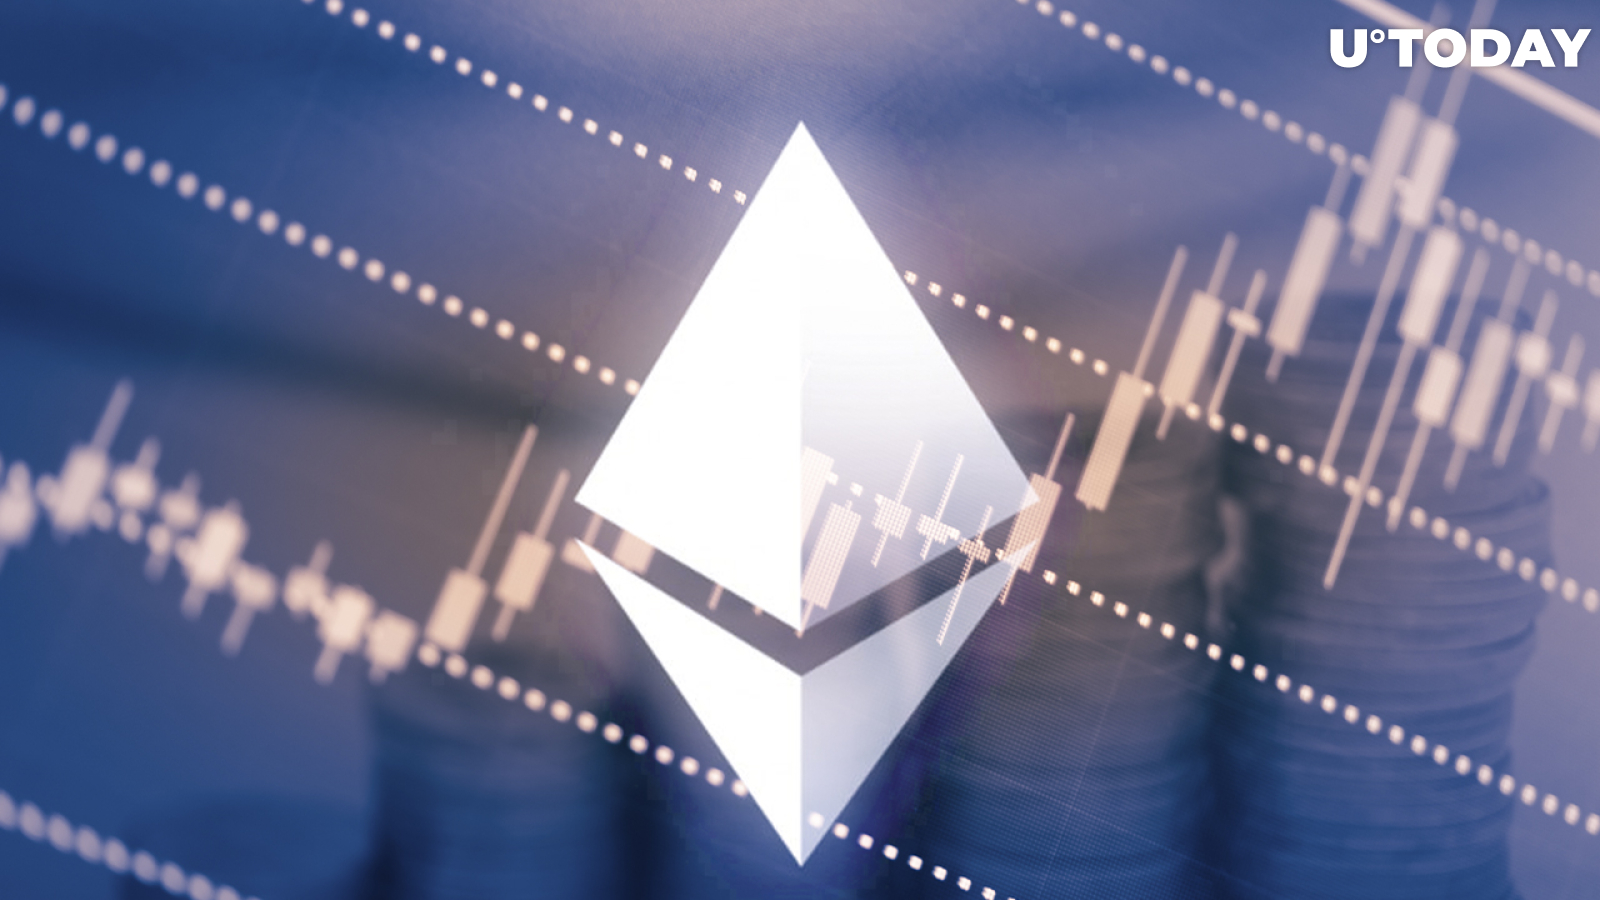 $56 Million ETH Bought by Crypto Hedge Fund Three Arrows Amid Dips